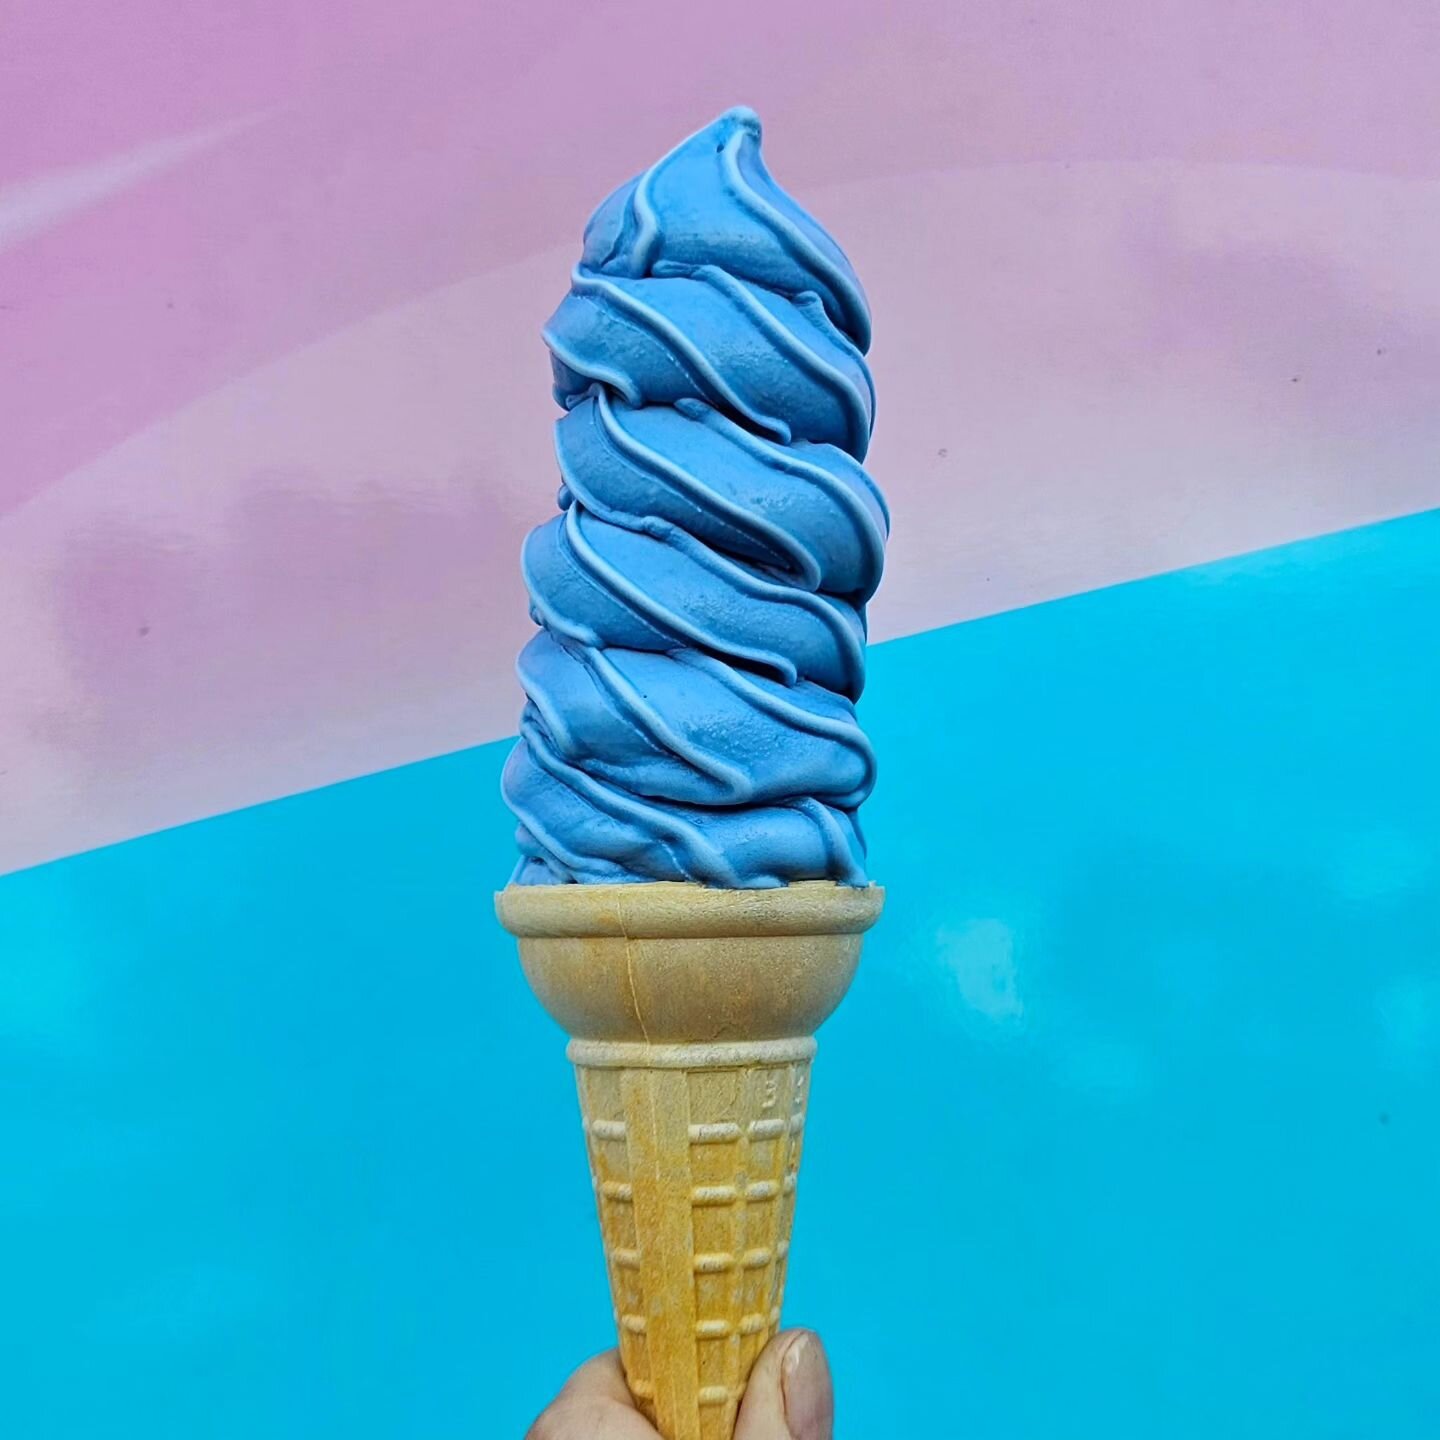 What's your favorite way to cool off with Blue Matcha? 🏖️

We love making Blue Matcha ice cream!🍦 This cold treat is packed with antioxidants and has a light floral flavor we just can't get enough of! 😋

#bluefood #bluematcha #icecream #matcha #ma